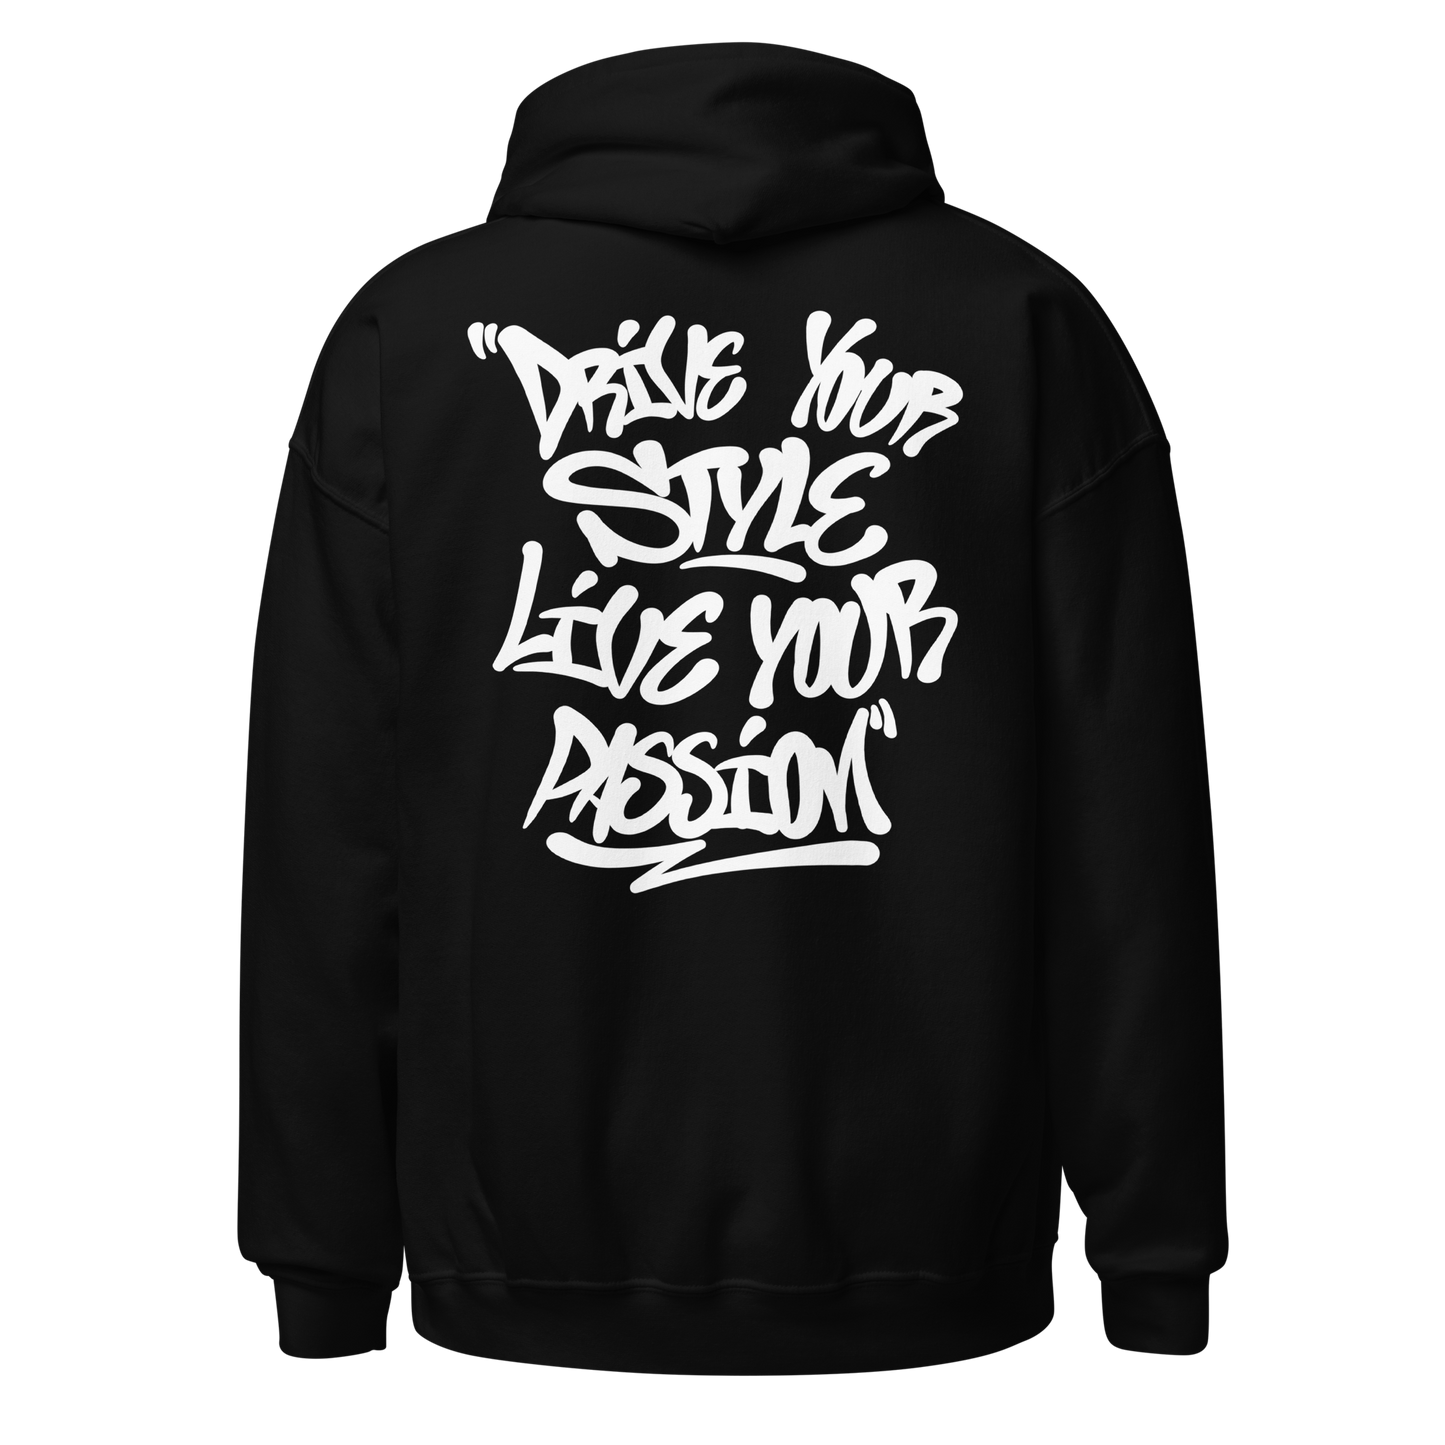 Drive Your Style Live Your Passion Hoodie